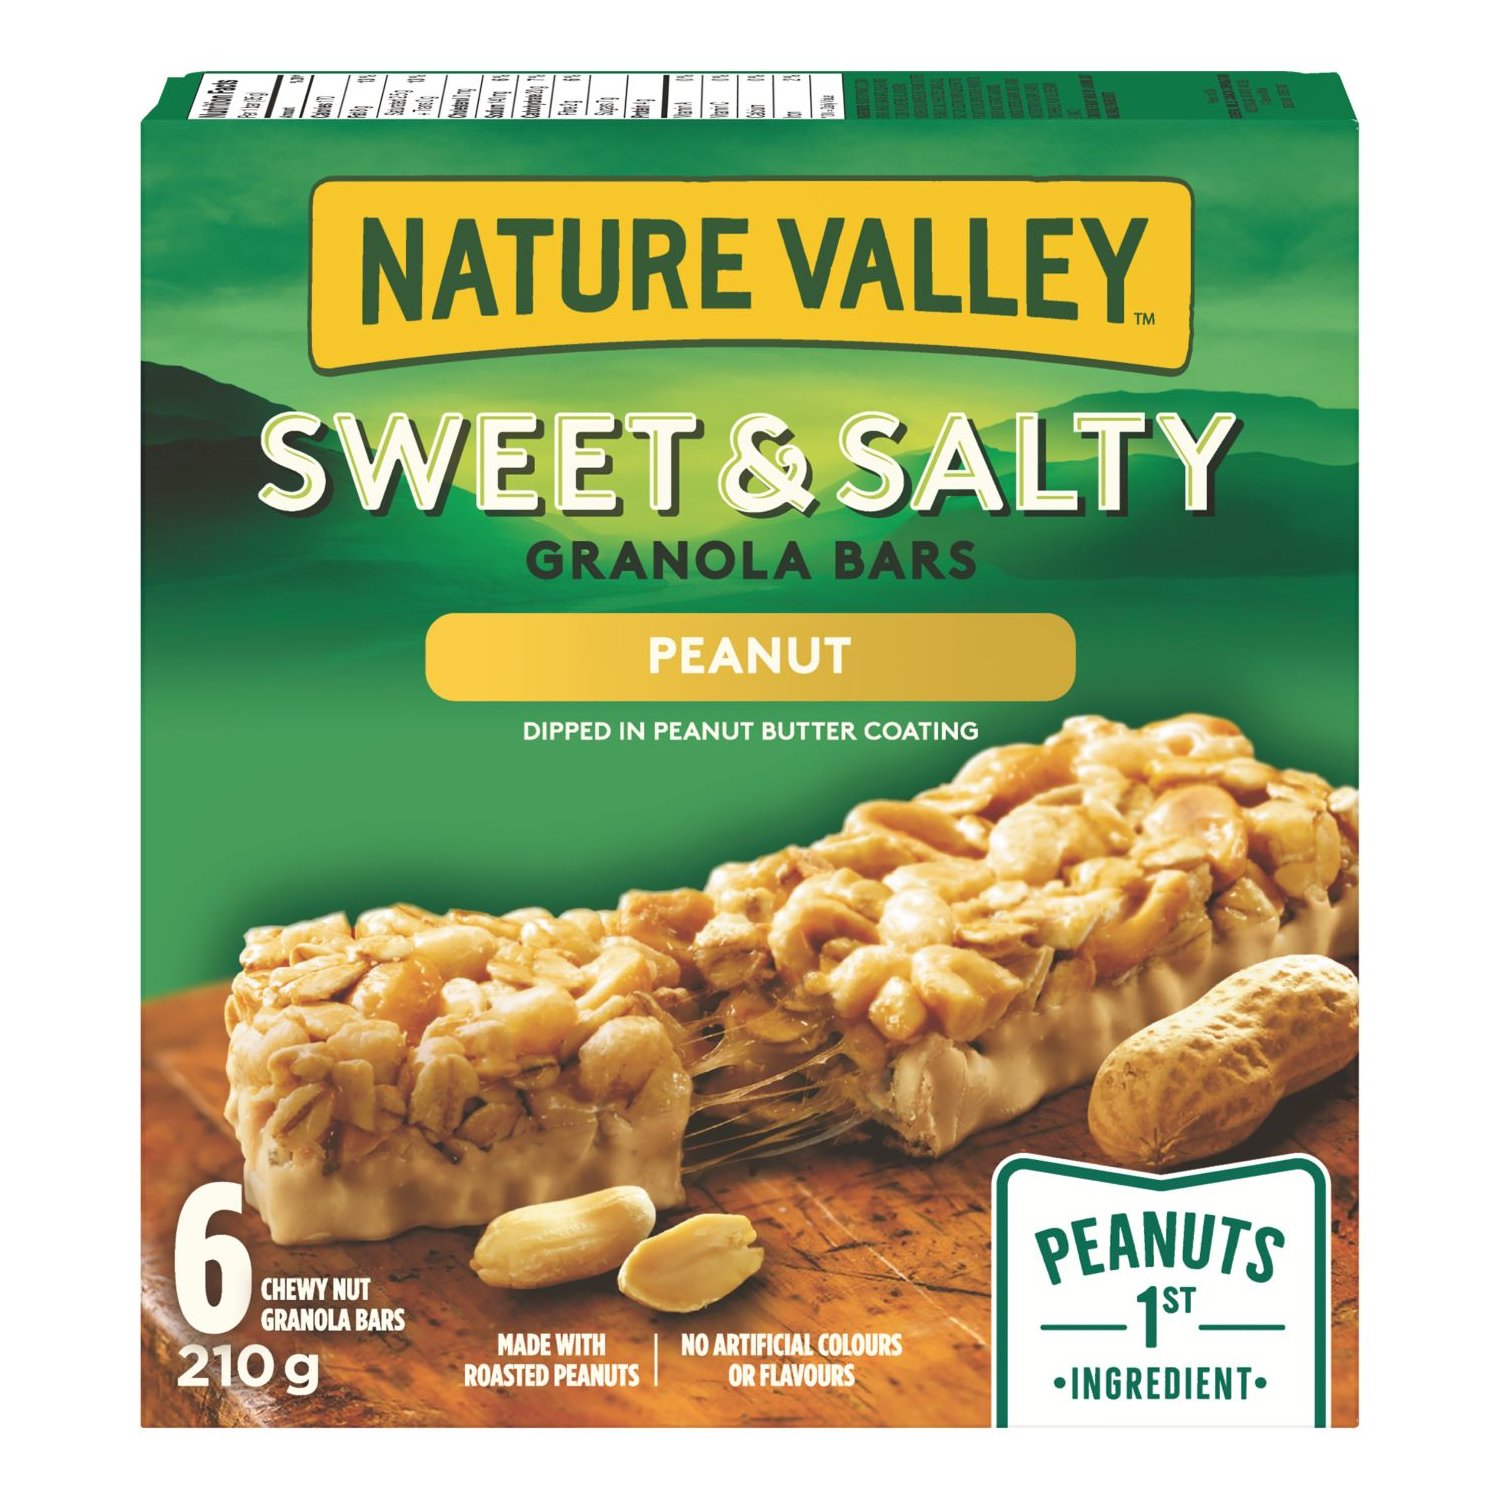 What are the health benefits of eating Nature Valley granola bars? - Quora